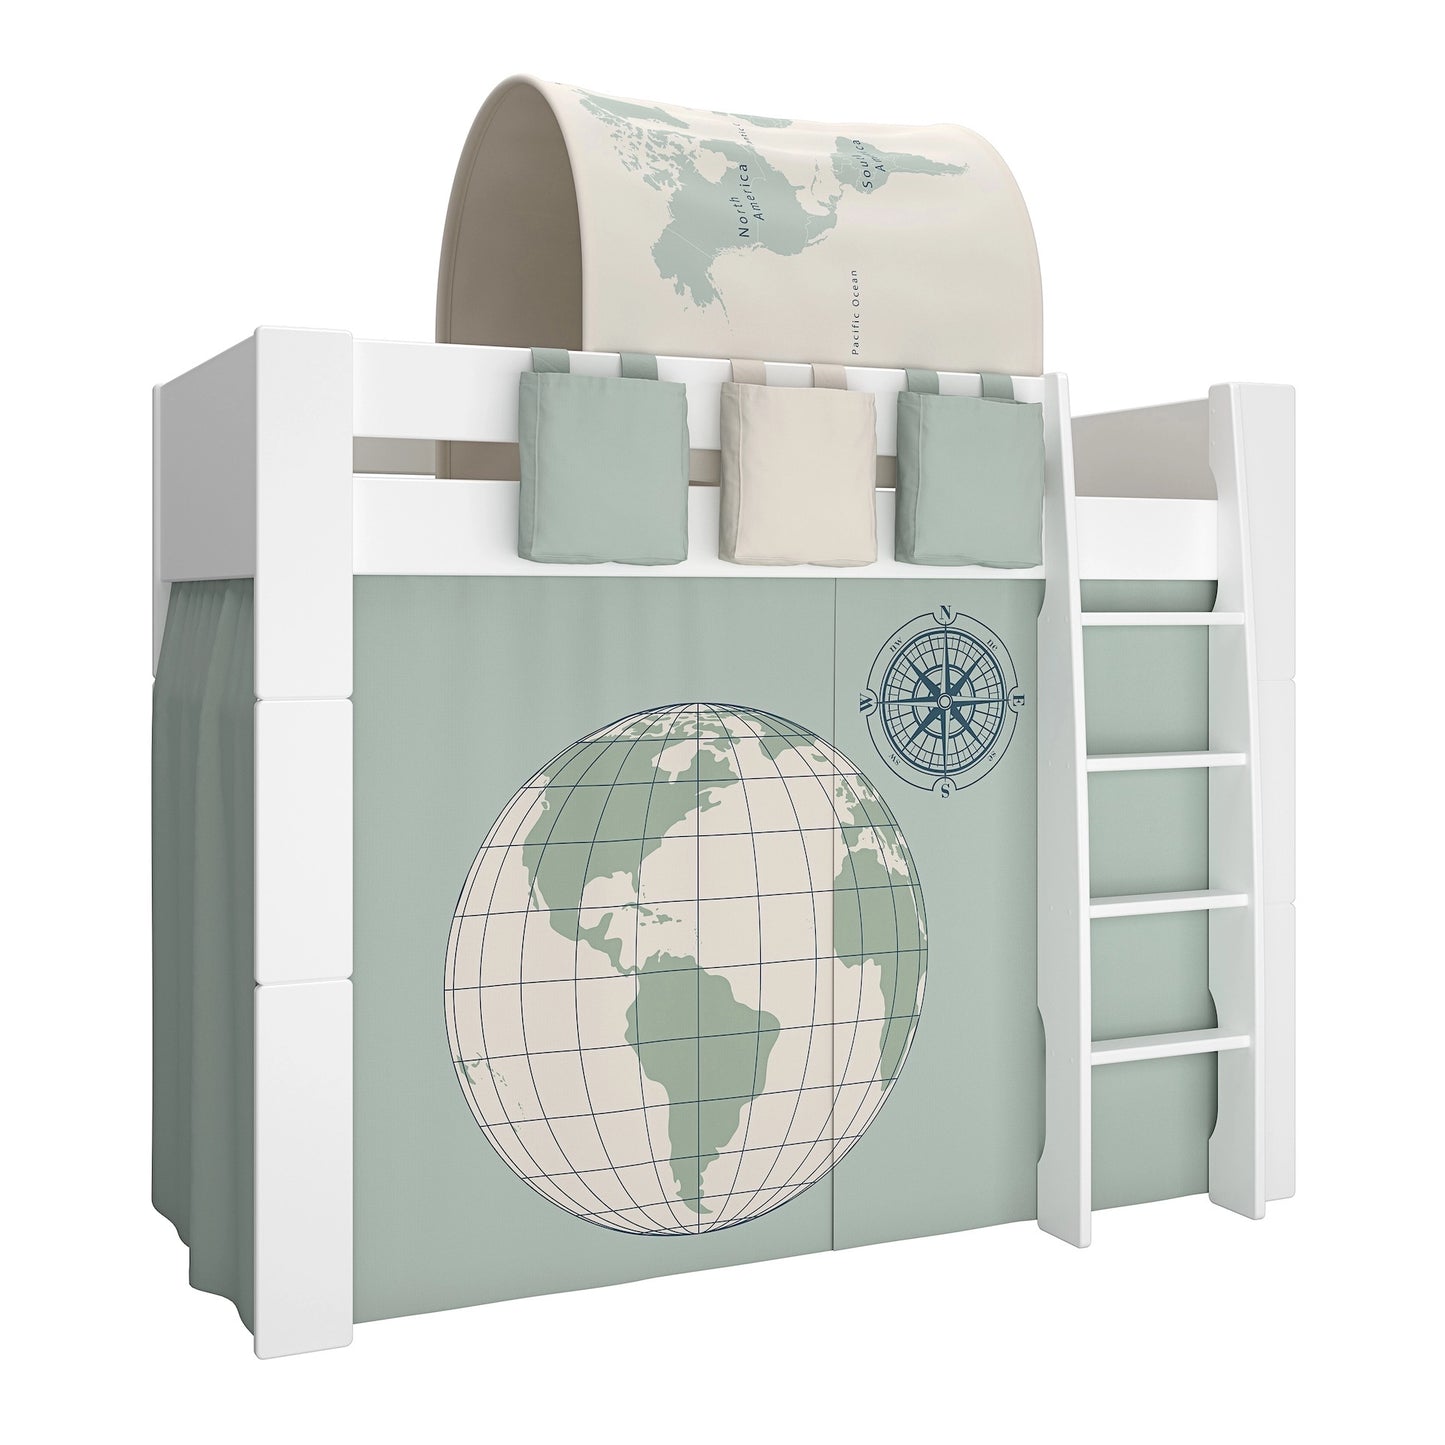 Furniture To Go Steens For Kids High Sleeper in Folkestone Grey, Includes - World Tent + Tunnel + 2 Pockets in Green + 1 Pocket in Sand